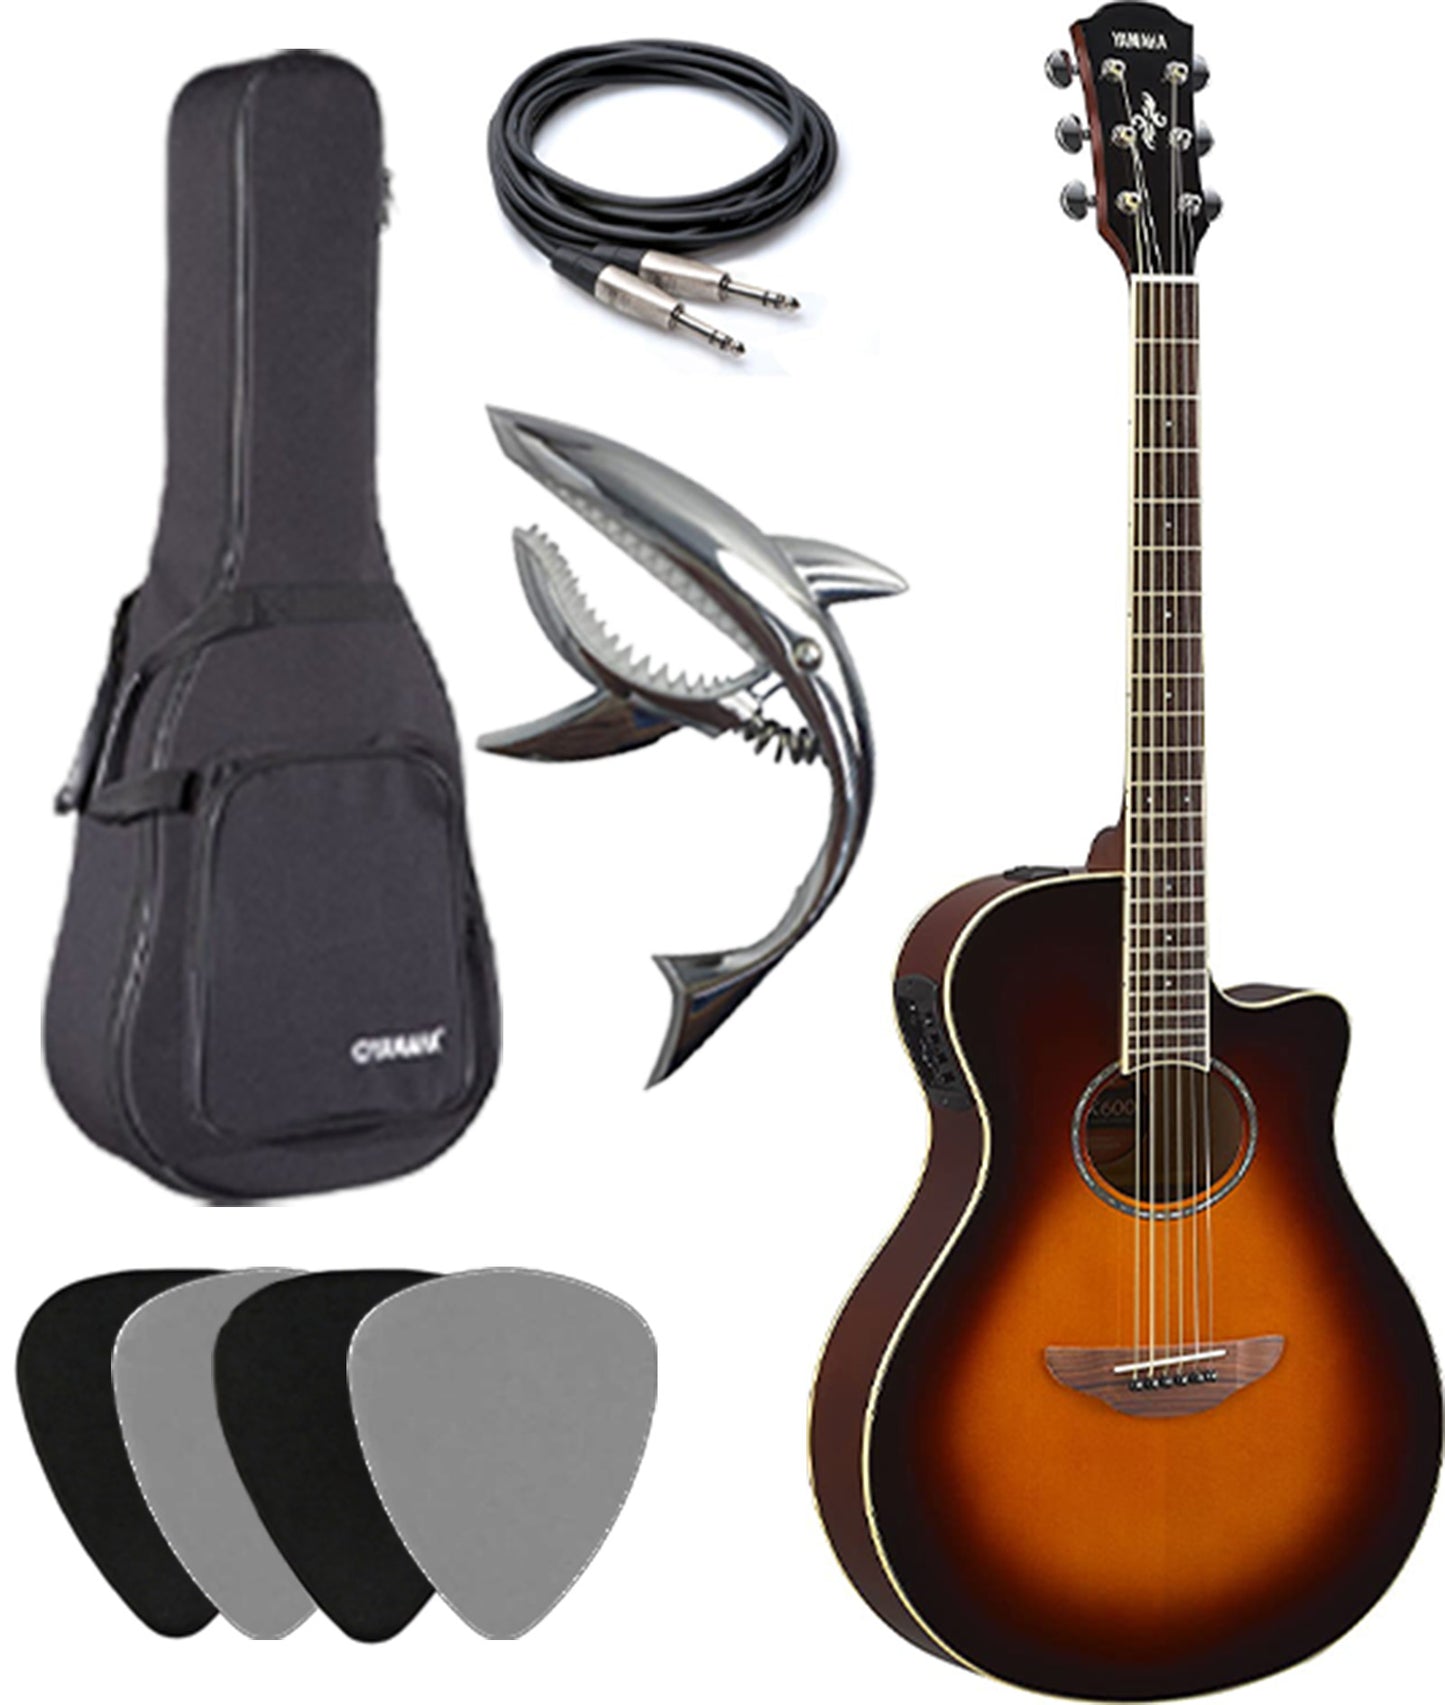 Yamaha APX600 Acoustic-Electric Guitar deluxe package